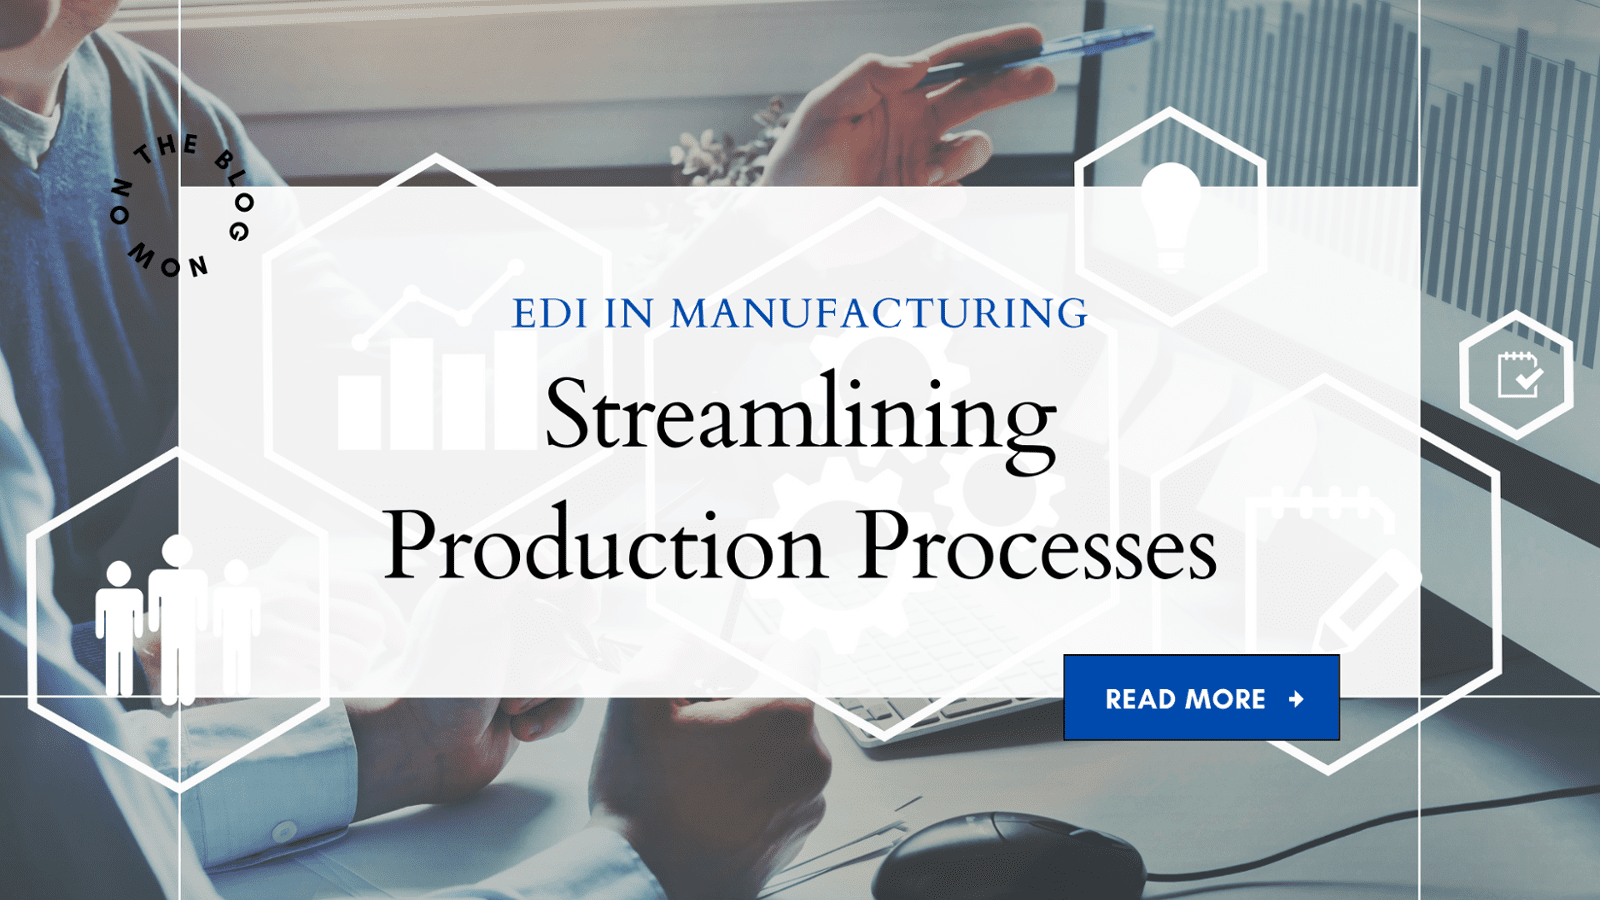 EDI in Manufacturing: Streamlining Production Processes